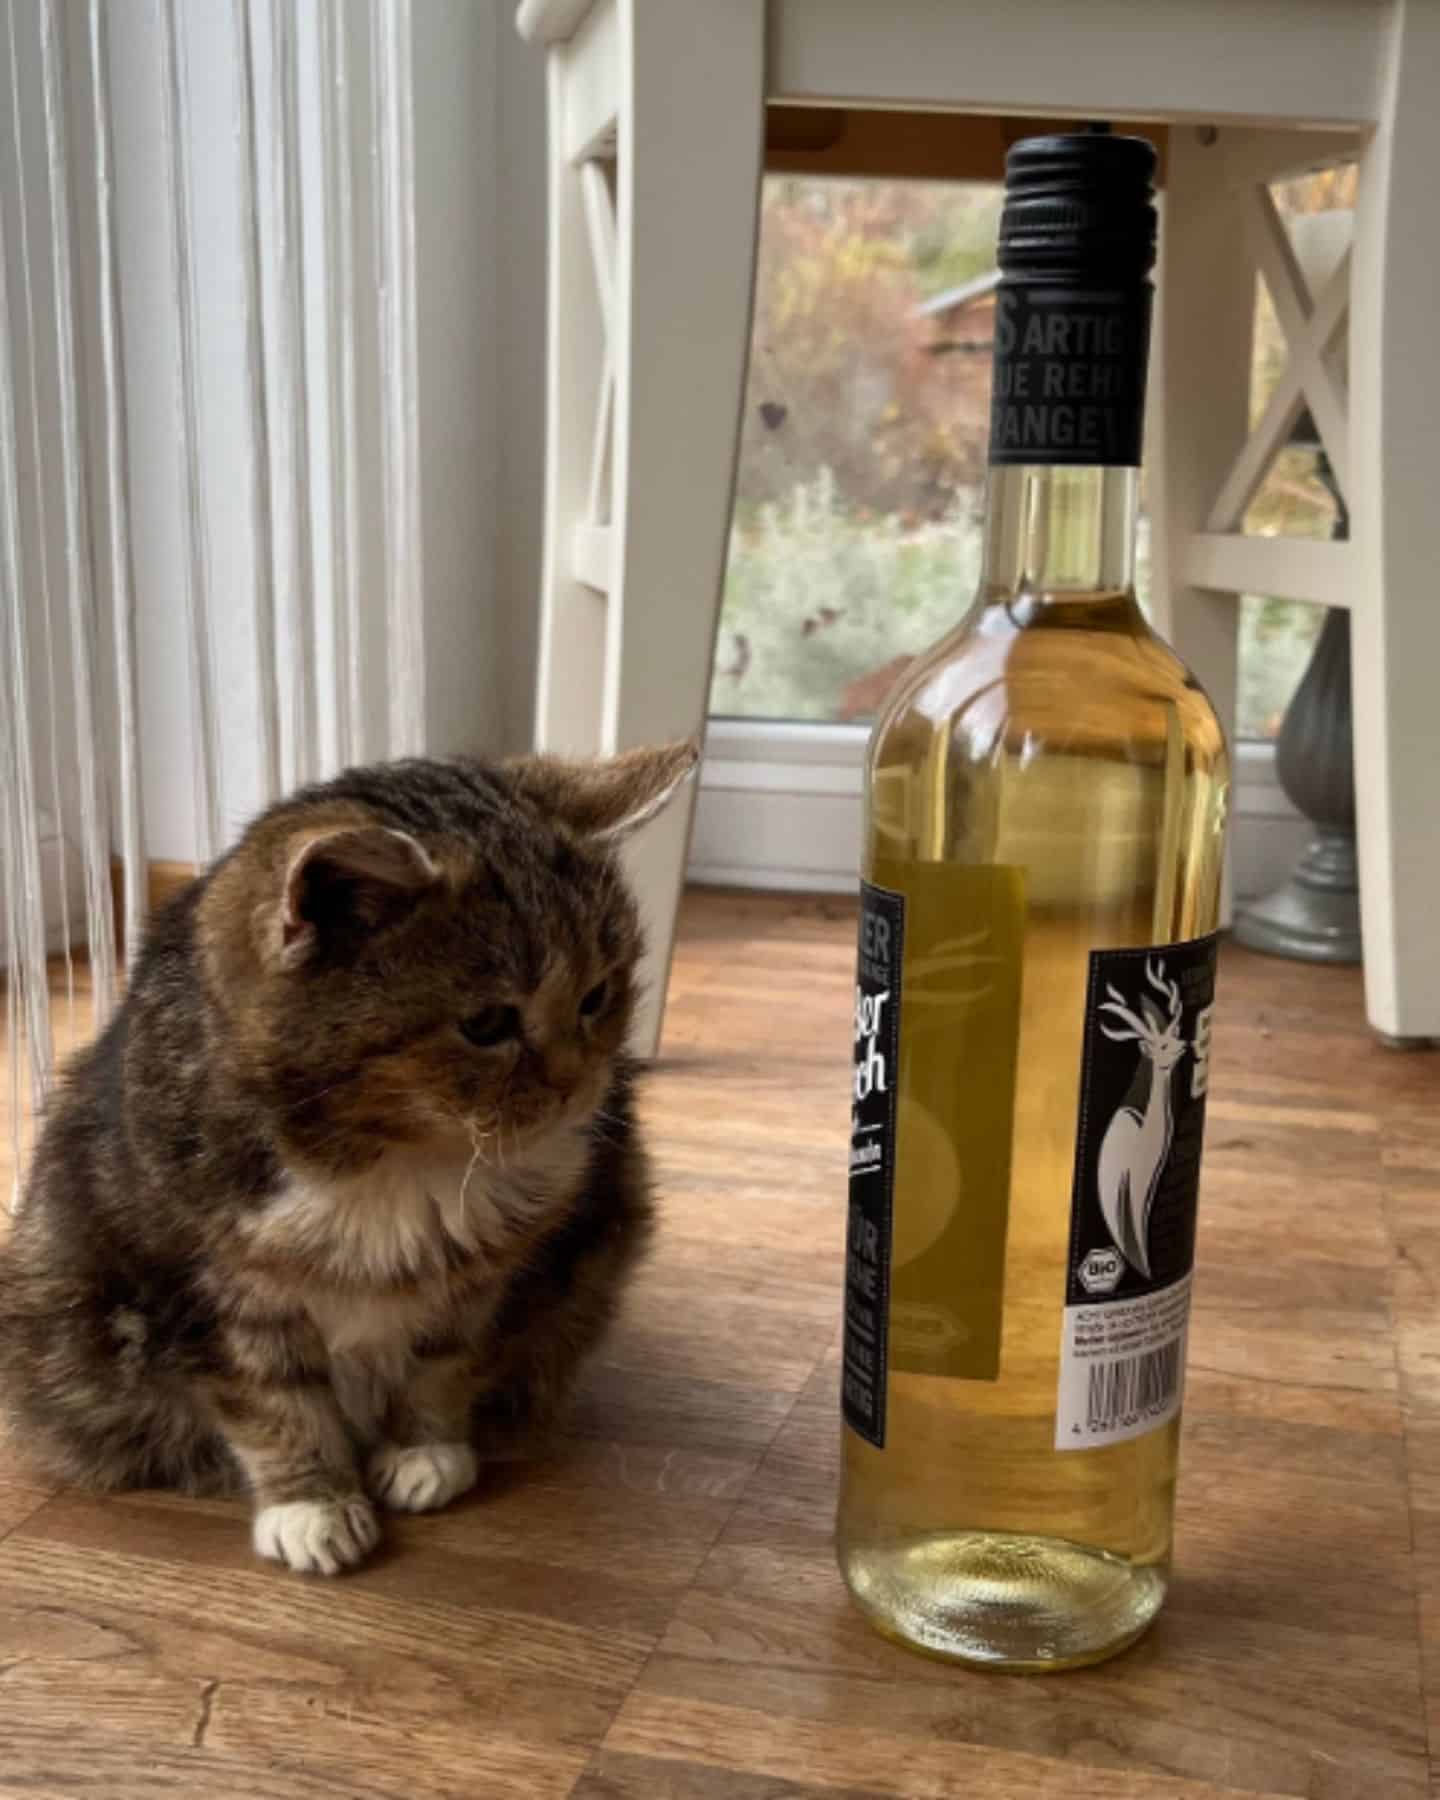 cat with dwarfism next to bottle